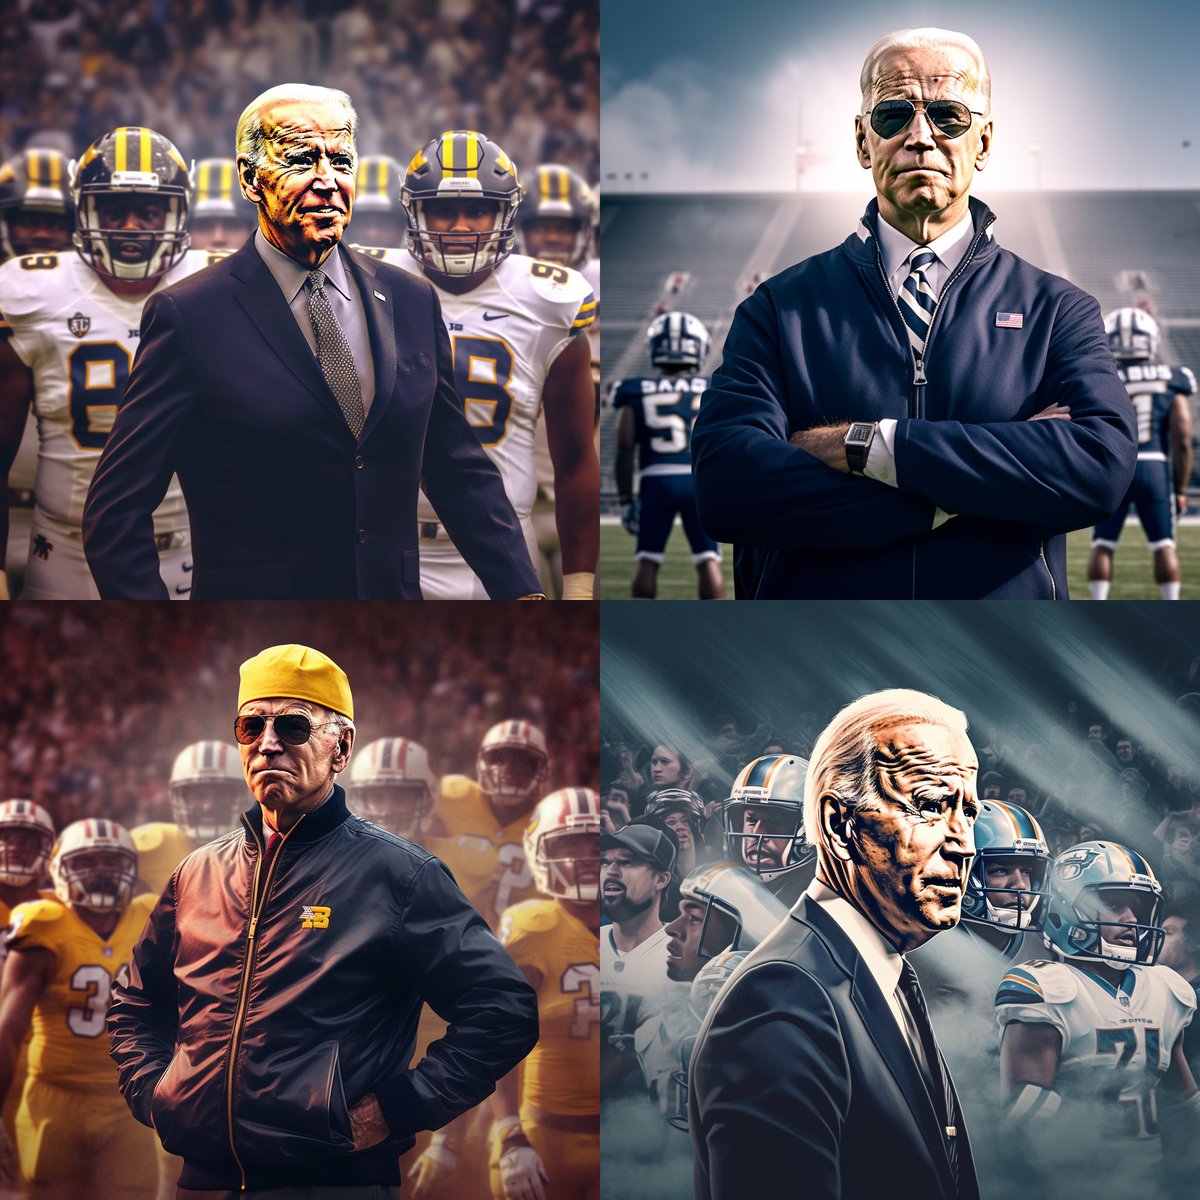 Here’s a little thread with the most recent presidents as College Football Coaches using Midjourney AI. Please forgive us. Joe Biden